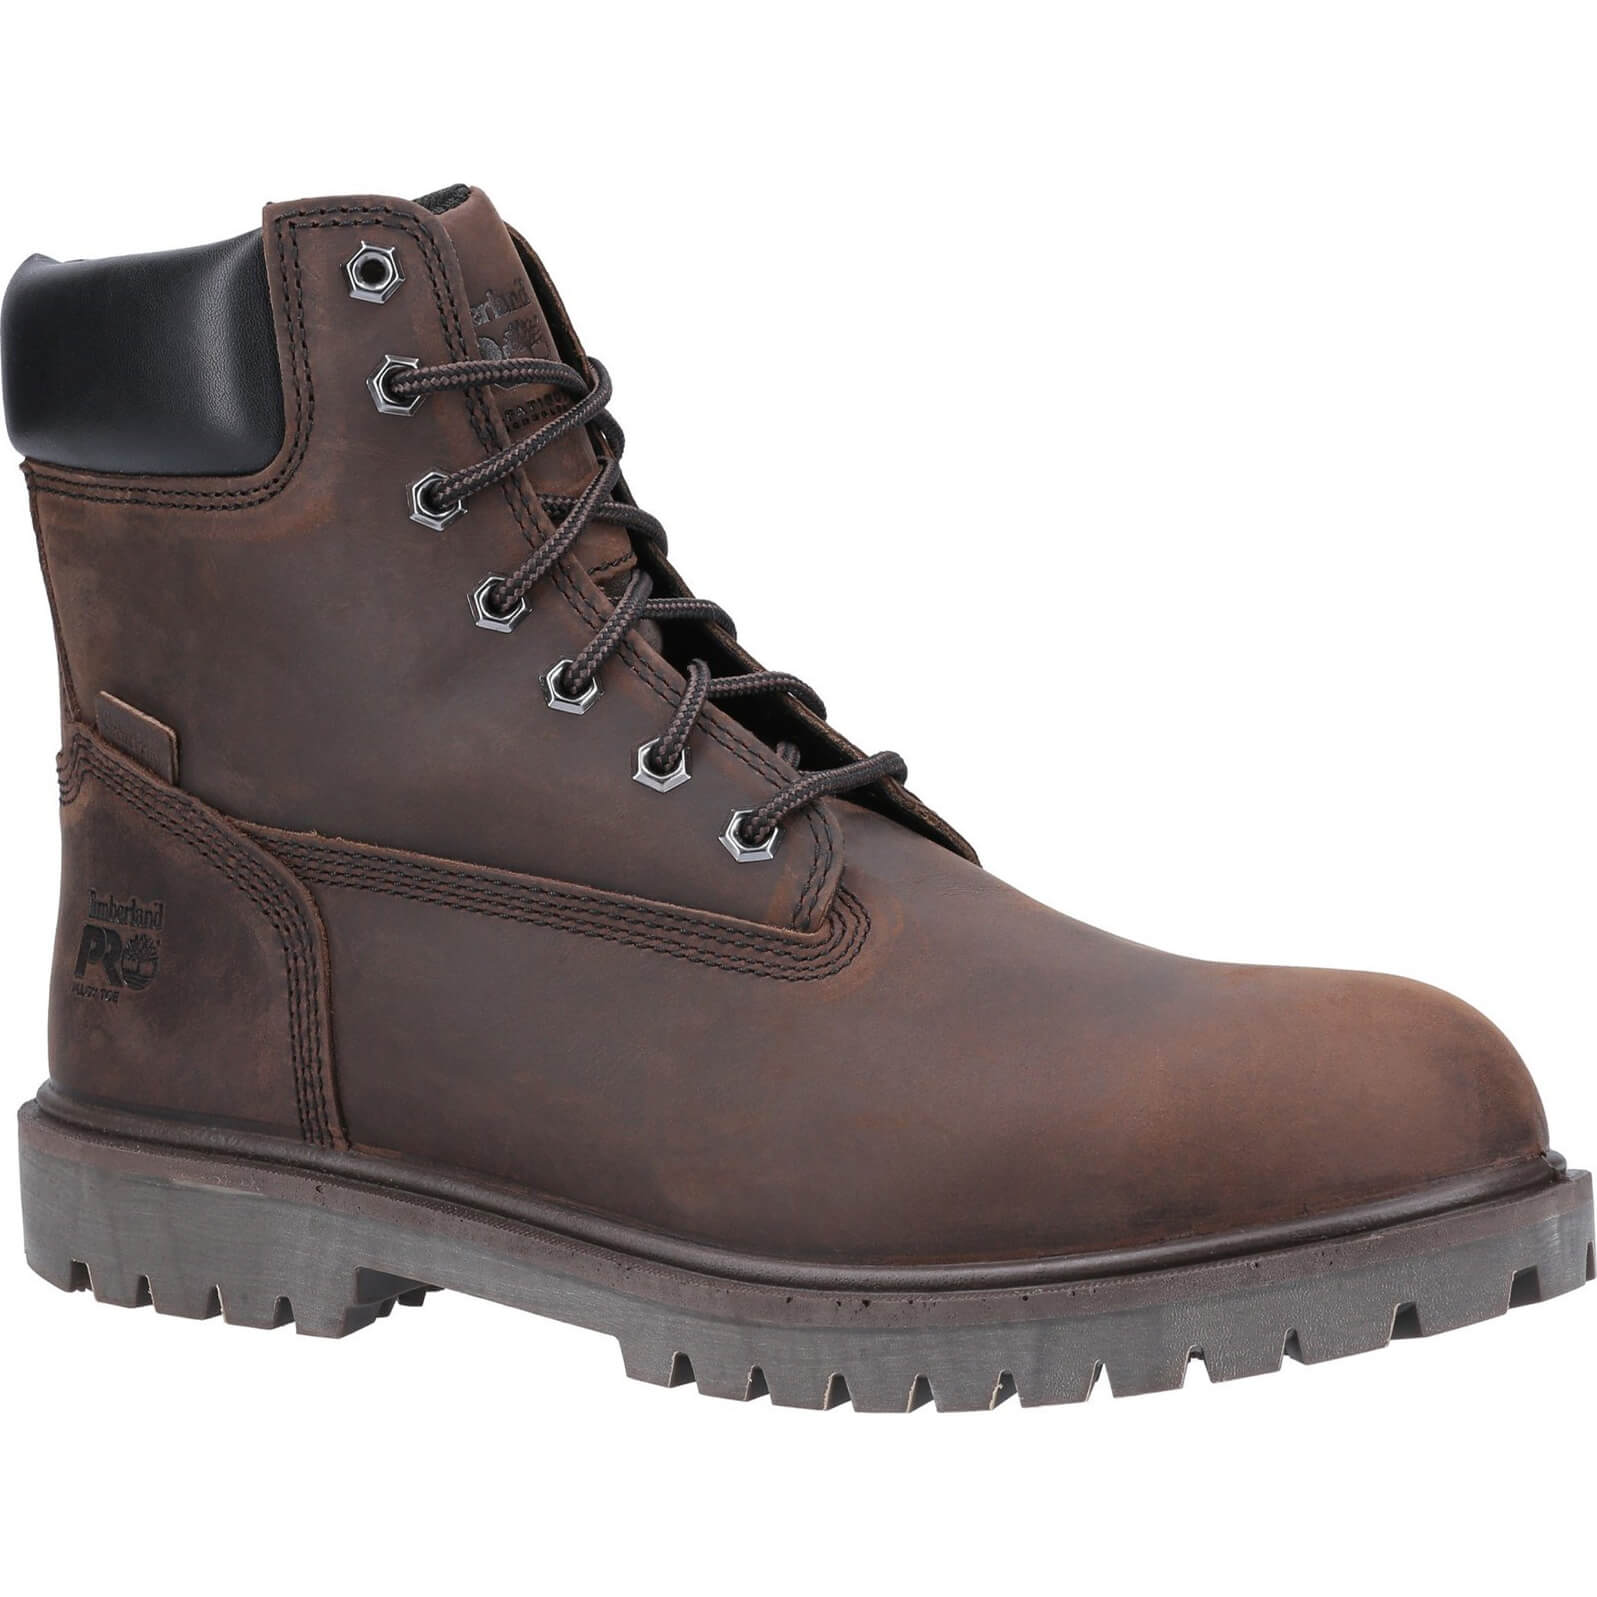 Image of Timberland Pro Iconic Safety Toe Work Boot Brown Size 14